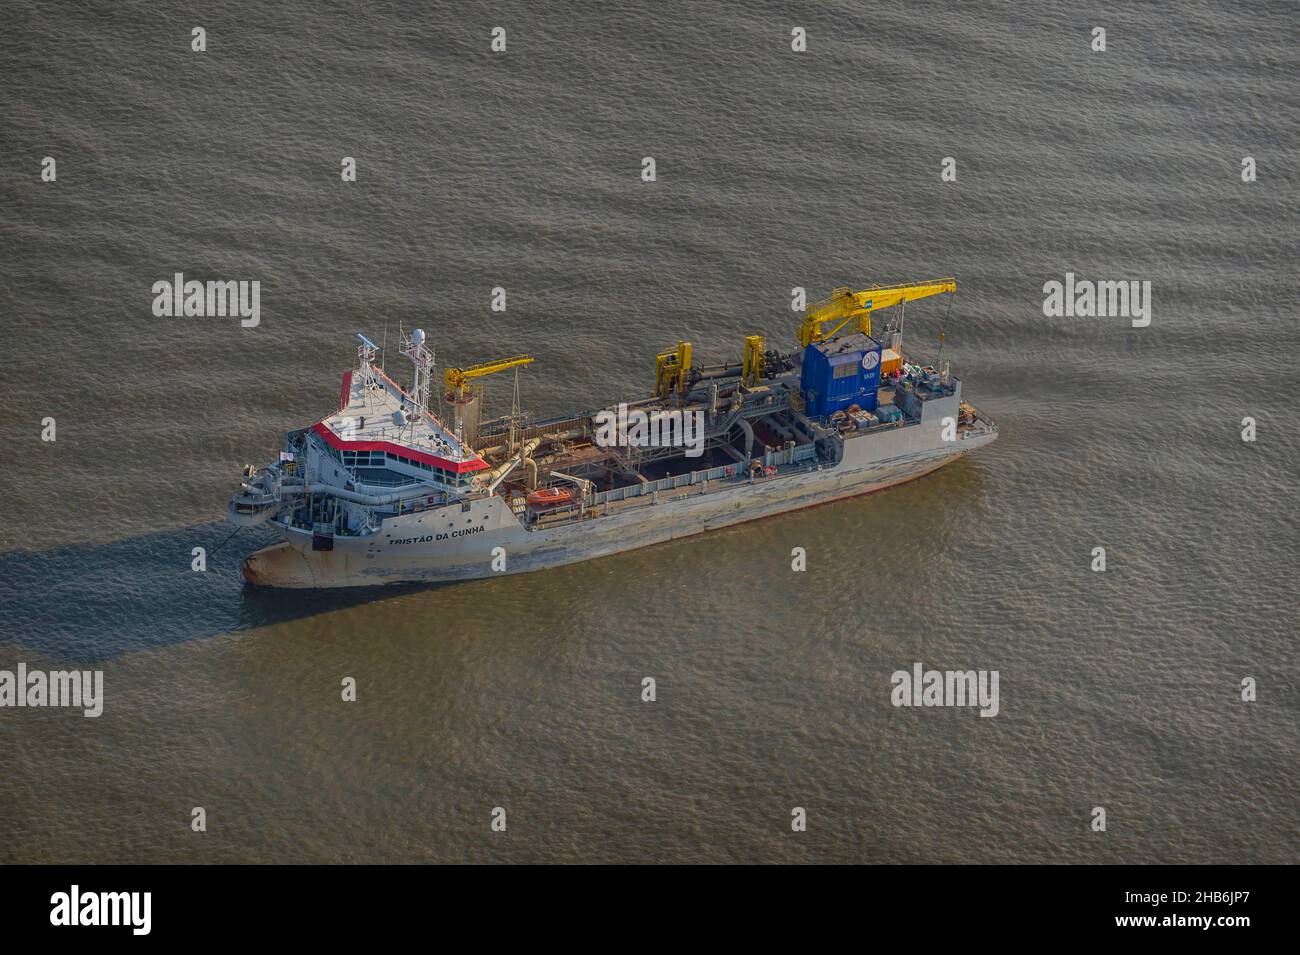 Dredger MS TRISTAO DA CUNHA waiting at anchor on the river Elbe, aerial view, Germany, Schleswig-Holstein, Hamburgisches Wattenmeer National Park Stock Photo